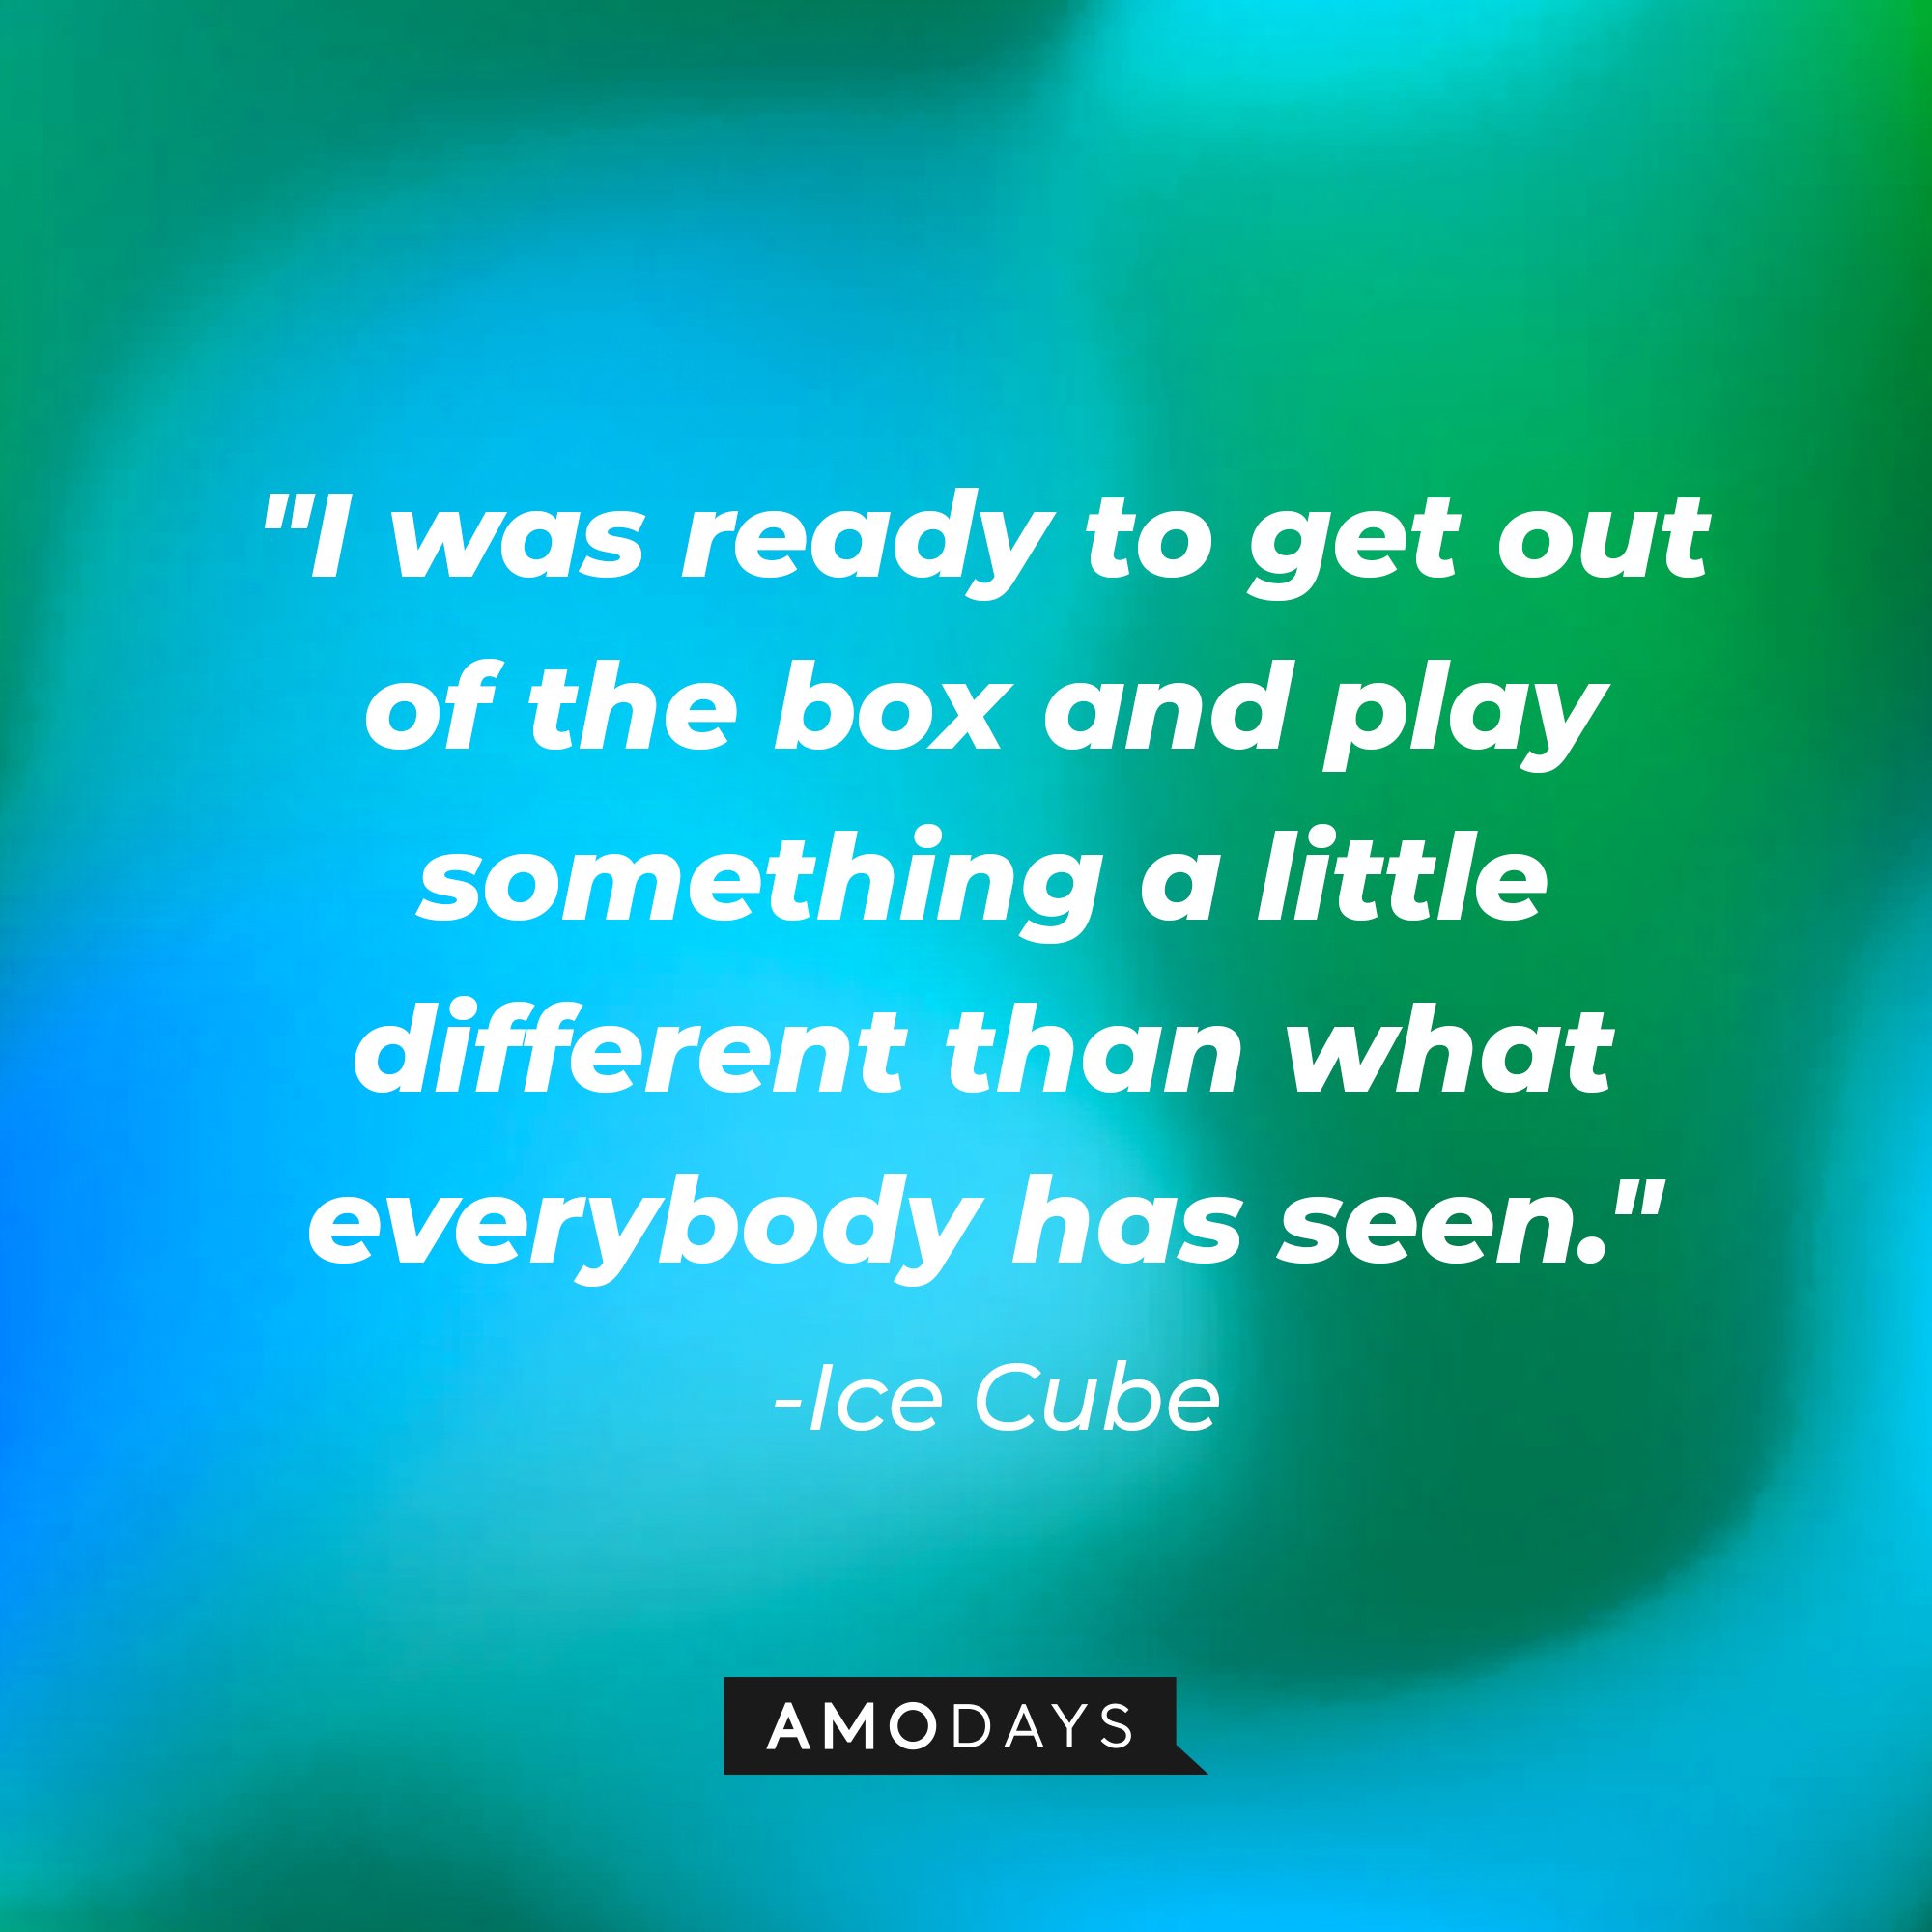 Ice Cube's quote: "I was ready to get out of the box and play something a little different than what everybody has seen." — Ice Cube | Image: AmoDays